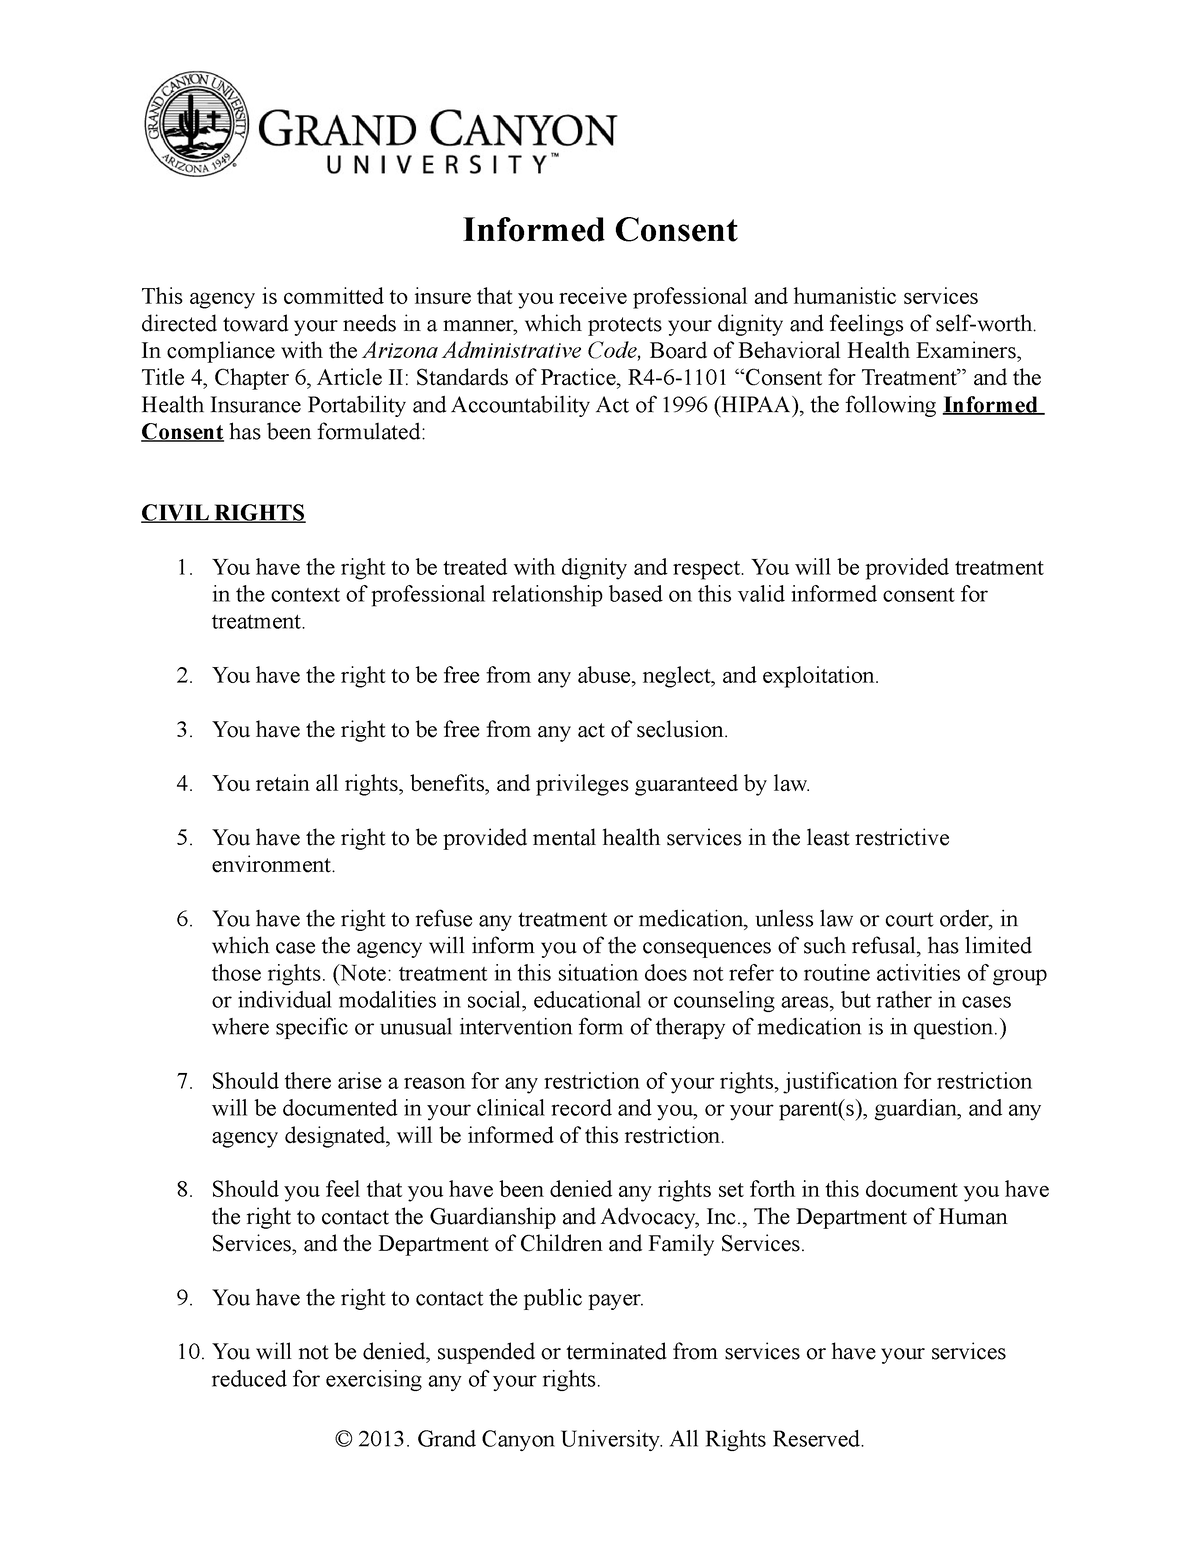 informed-consent-form-informed-consent-this-agency-is-committed-to